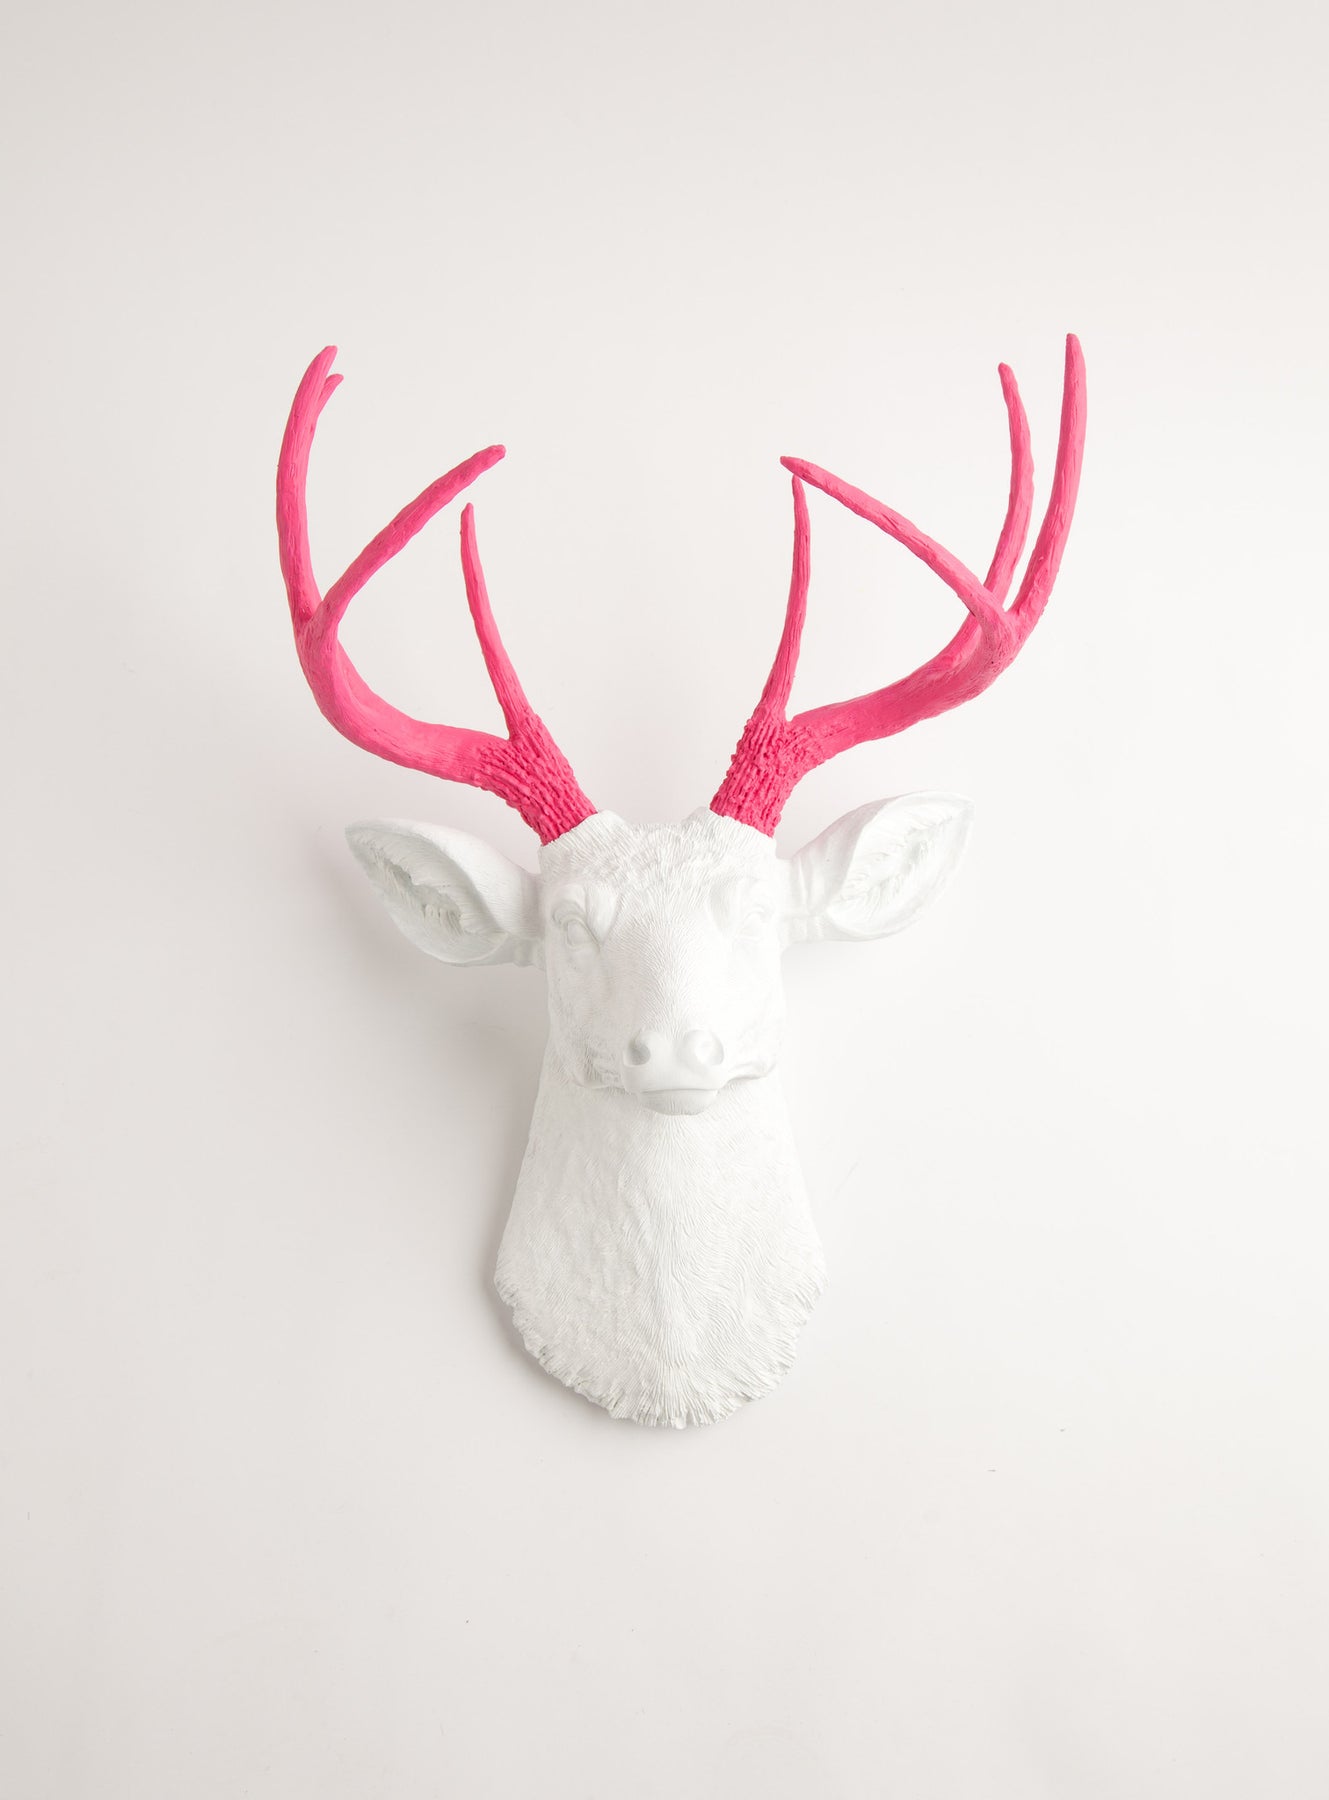 Back in Stock! The Boris, Stag Deer Head, Faux Taxidermy